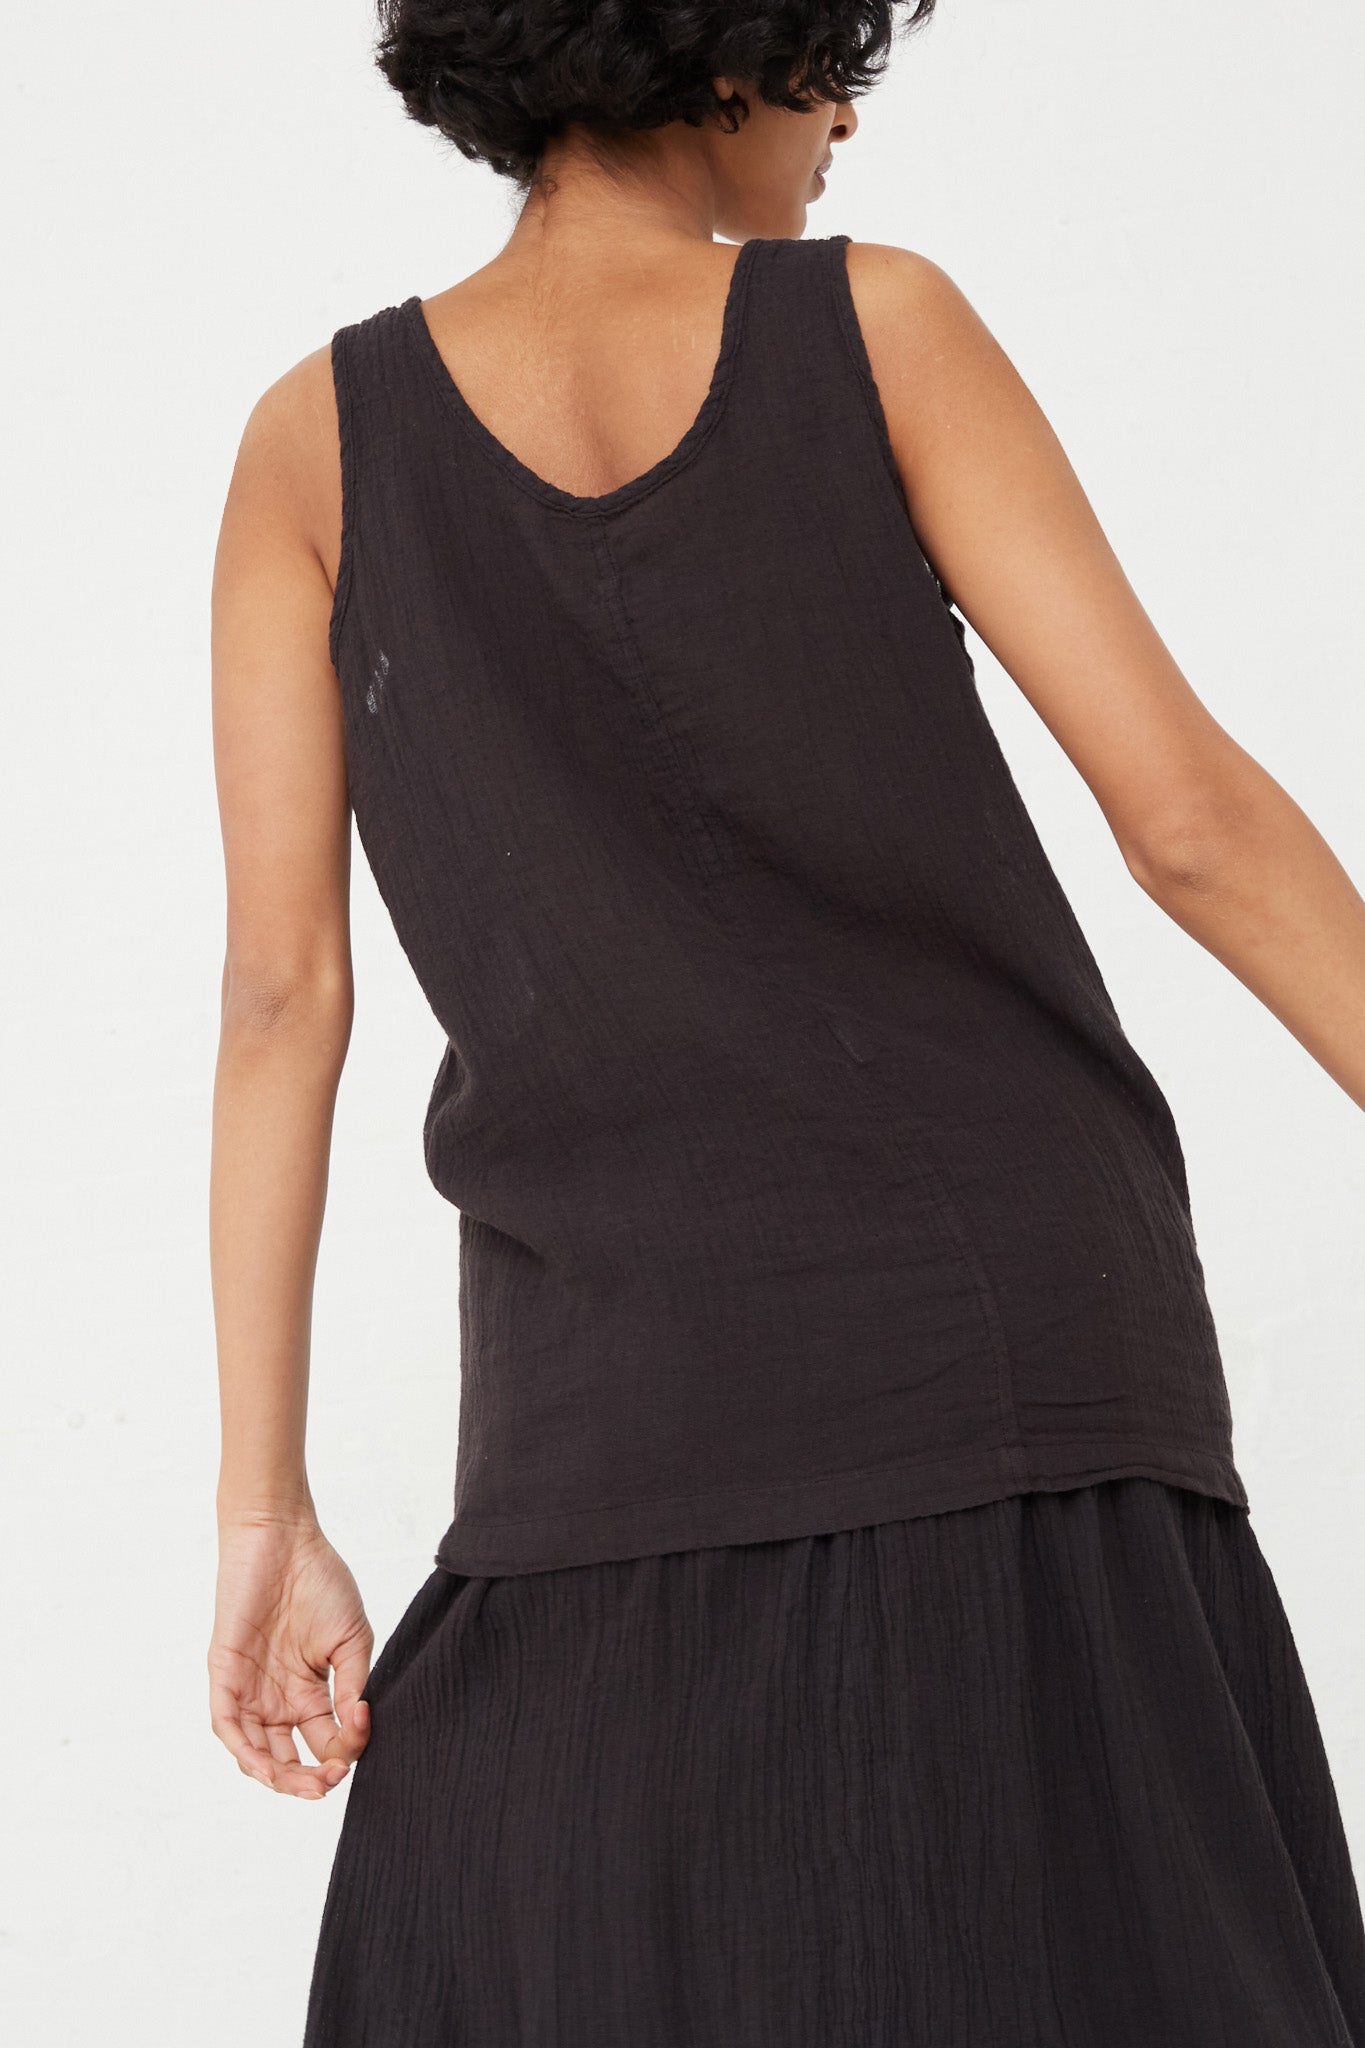 The Black Crane Tank Top in Black, made of a cotton linen blend, showcasing the back view of woman.